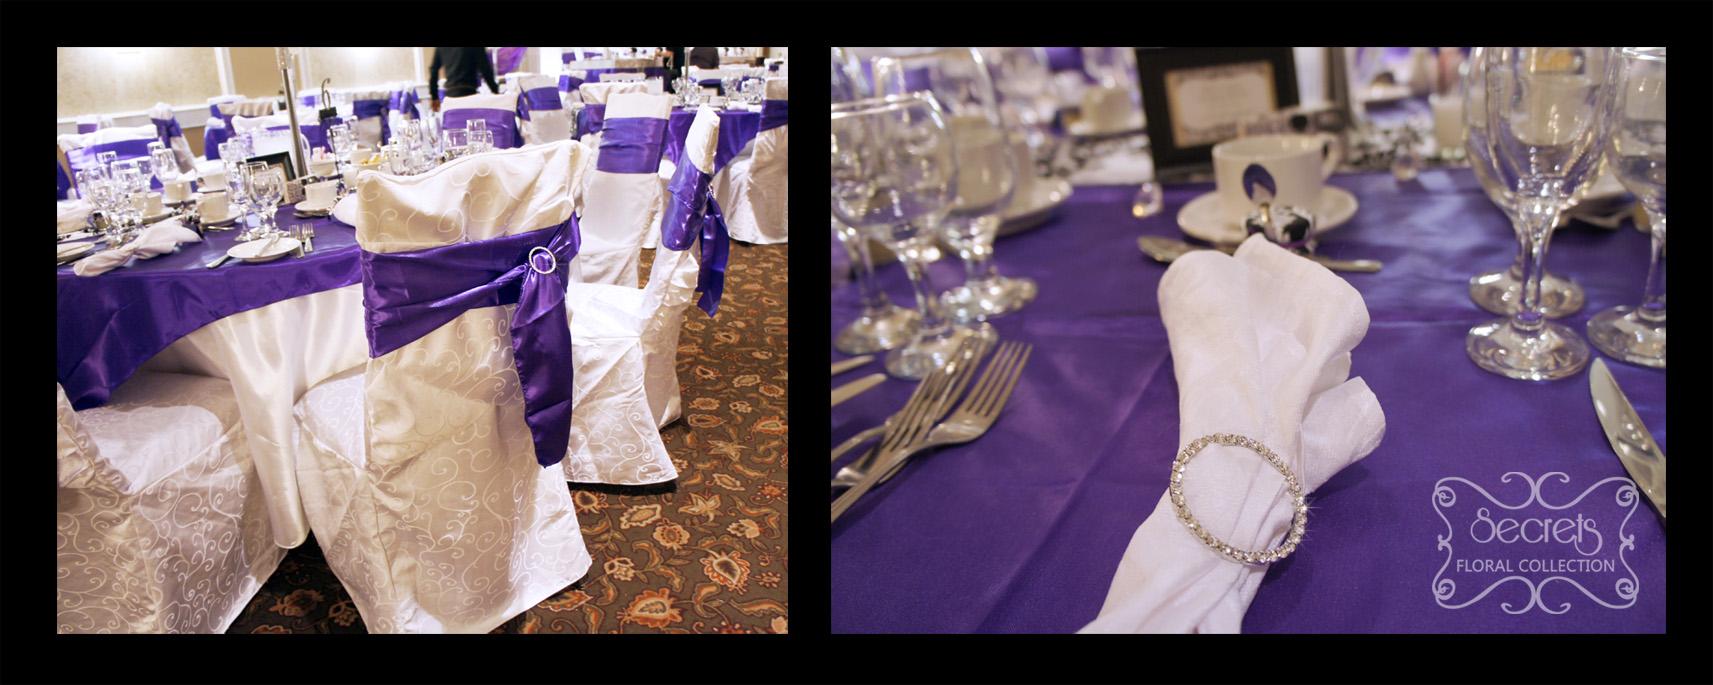 Both the sashes and napkins are hold with Swarovski crystal buckles - Toronto Wedding Decor Created by Secrets Floral Collection